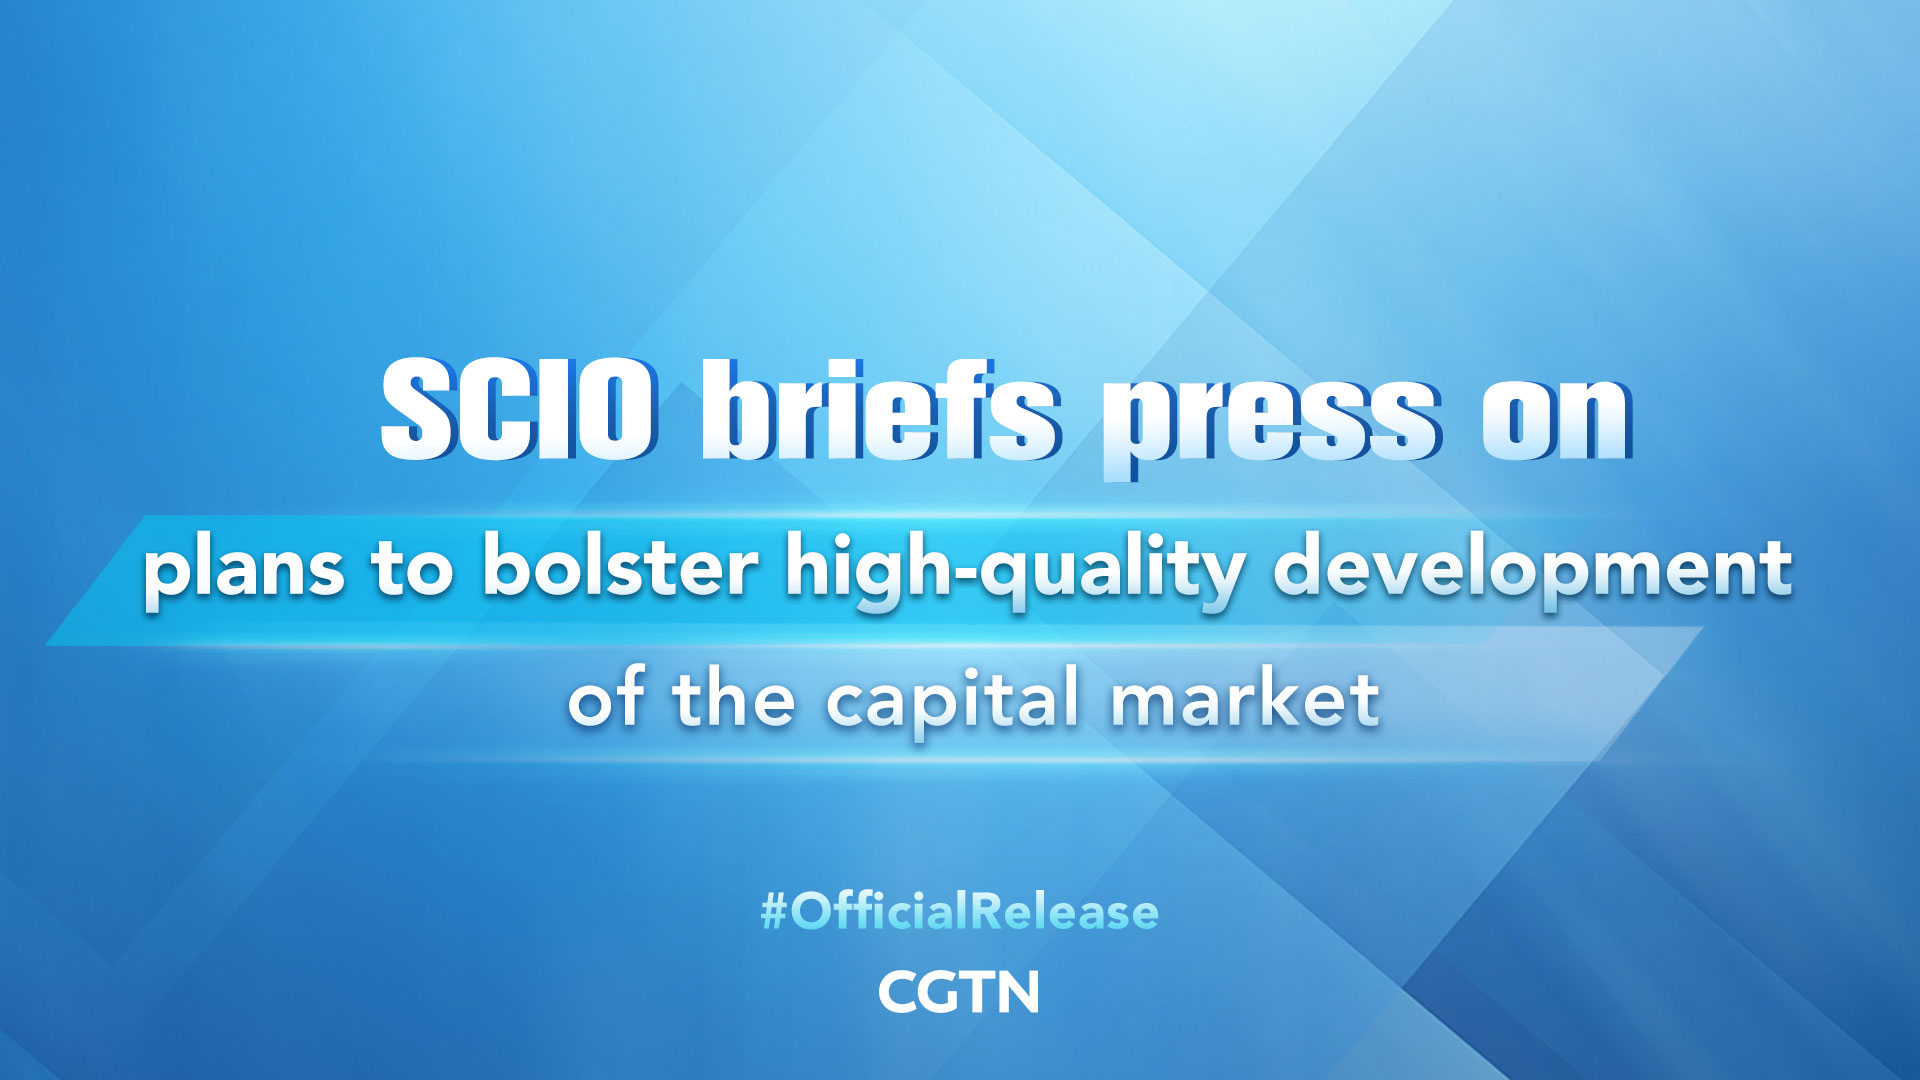 Live: SCIO briefs press on plans to bolster high-quality development of the capital market